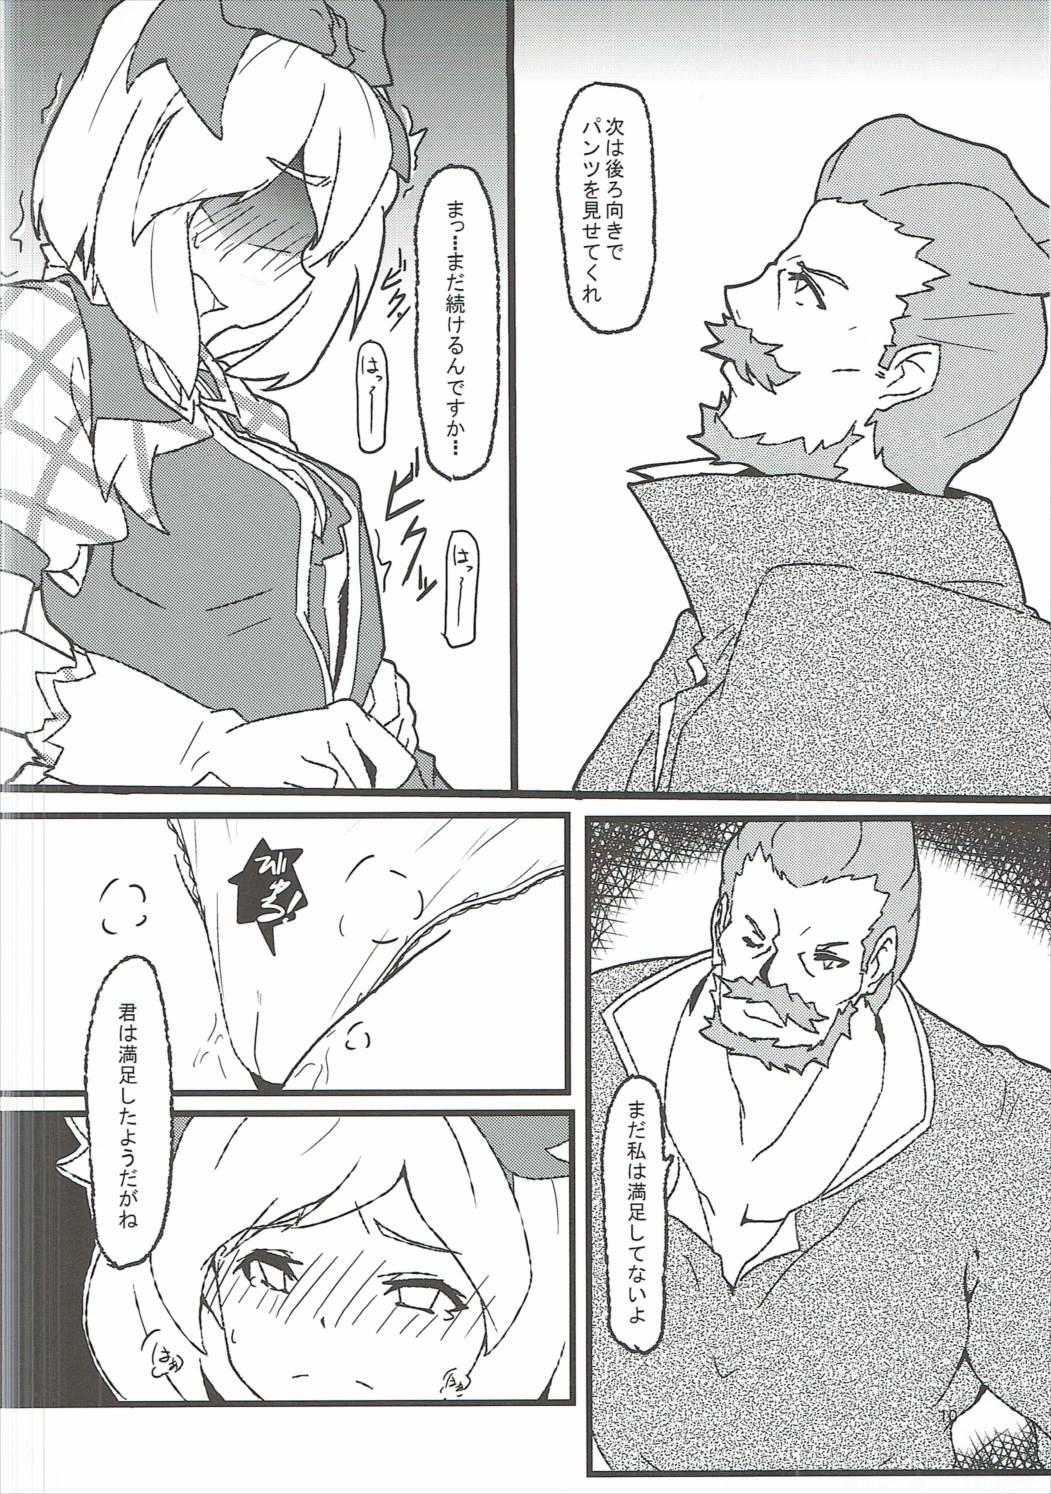 Licking Pussy Surprise Ticket - Granblue fantasy Footjob - Page 11